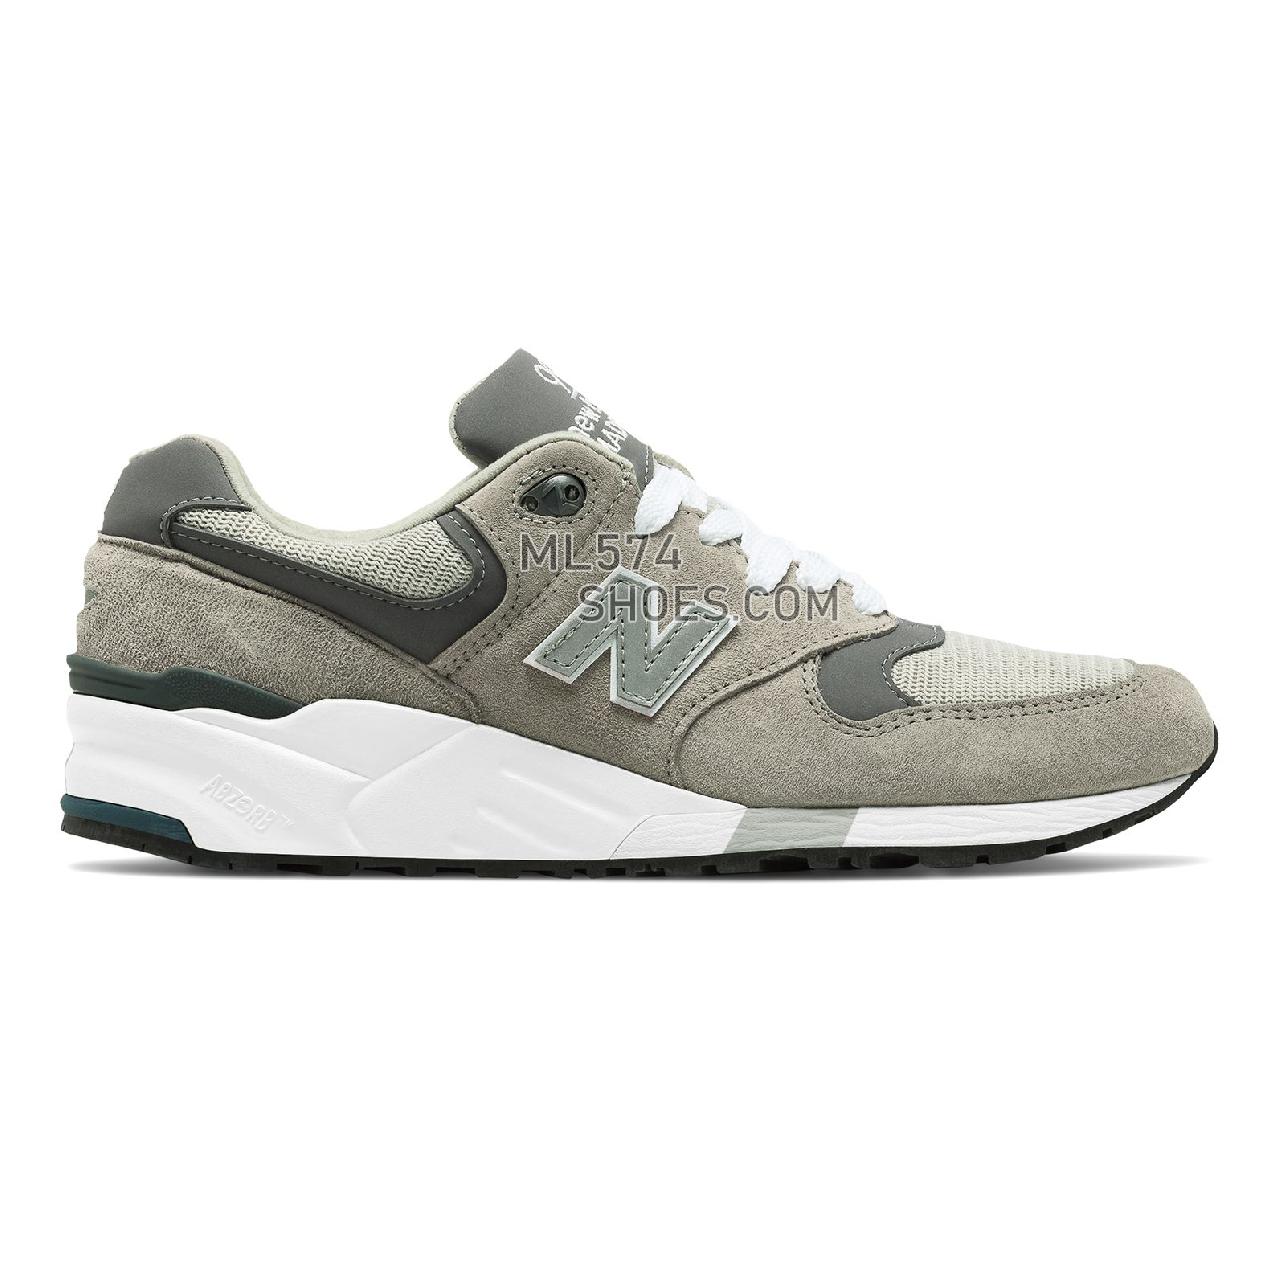 New Balance Made in US 999 - Men's 999 - Classic Grey with Pewter - M999CGL